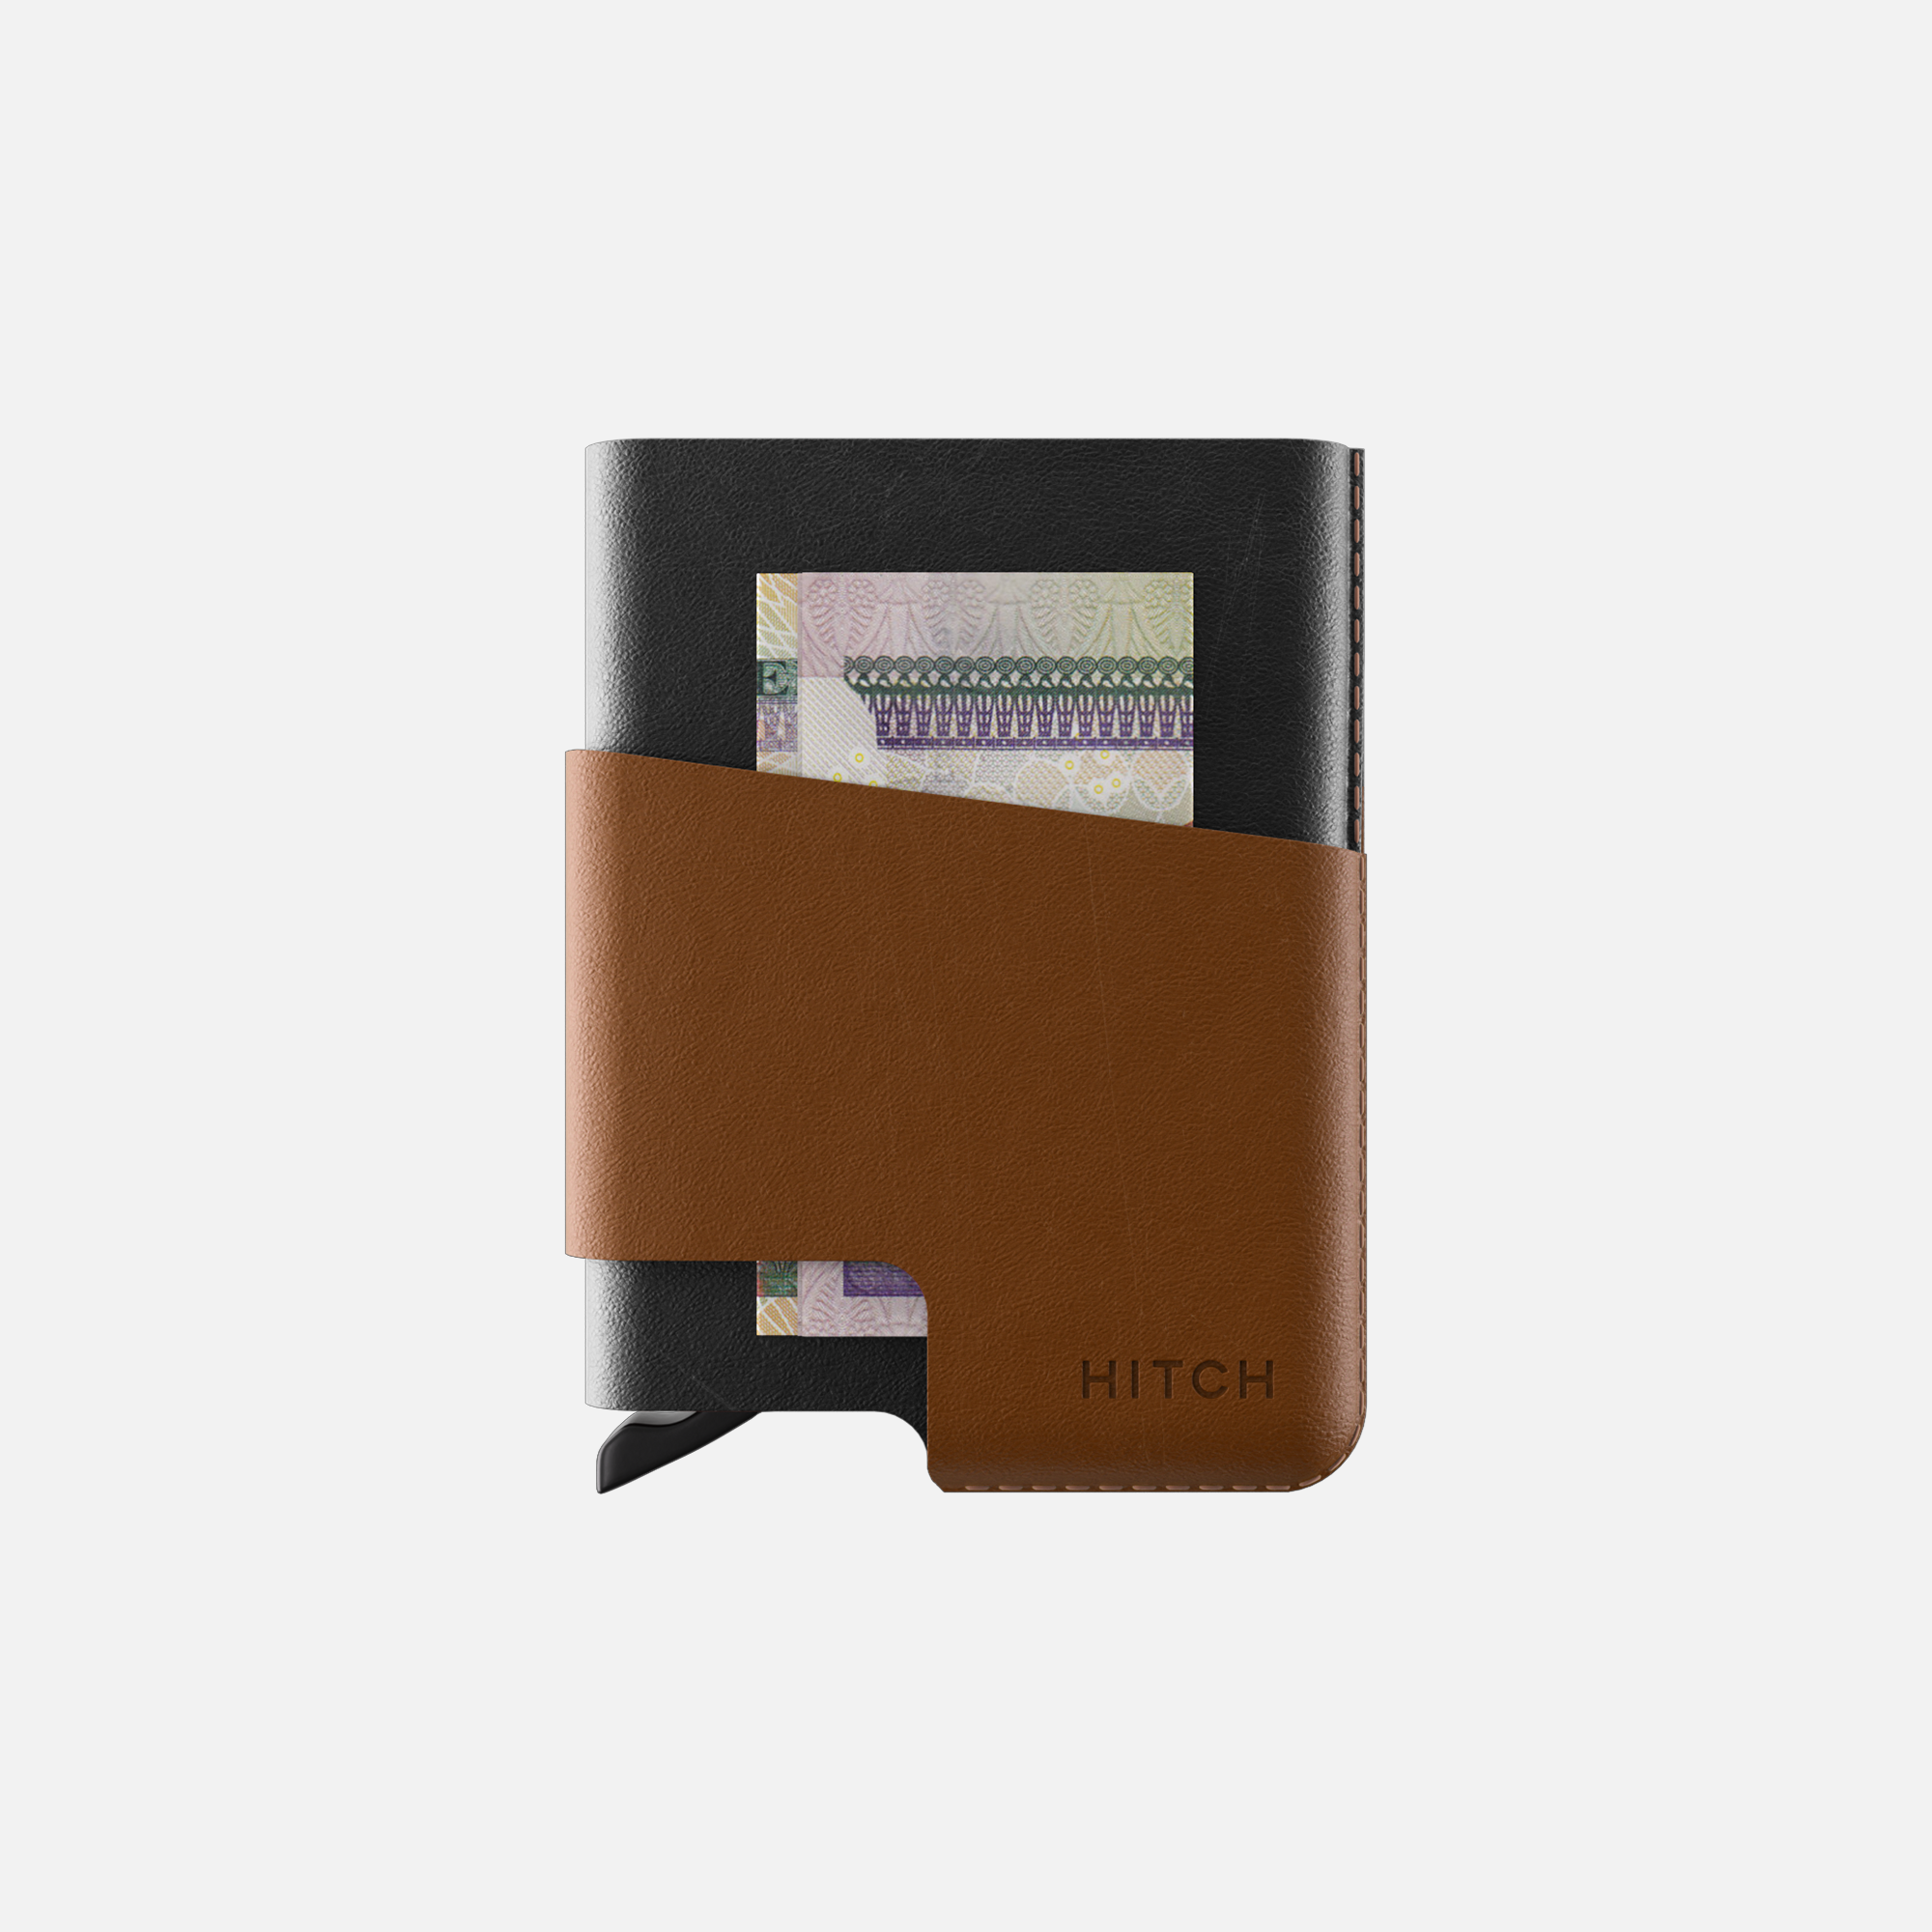 Black and brown leather notebook with partial currency note visible, branded HITCH".